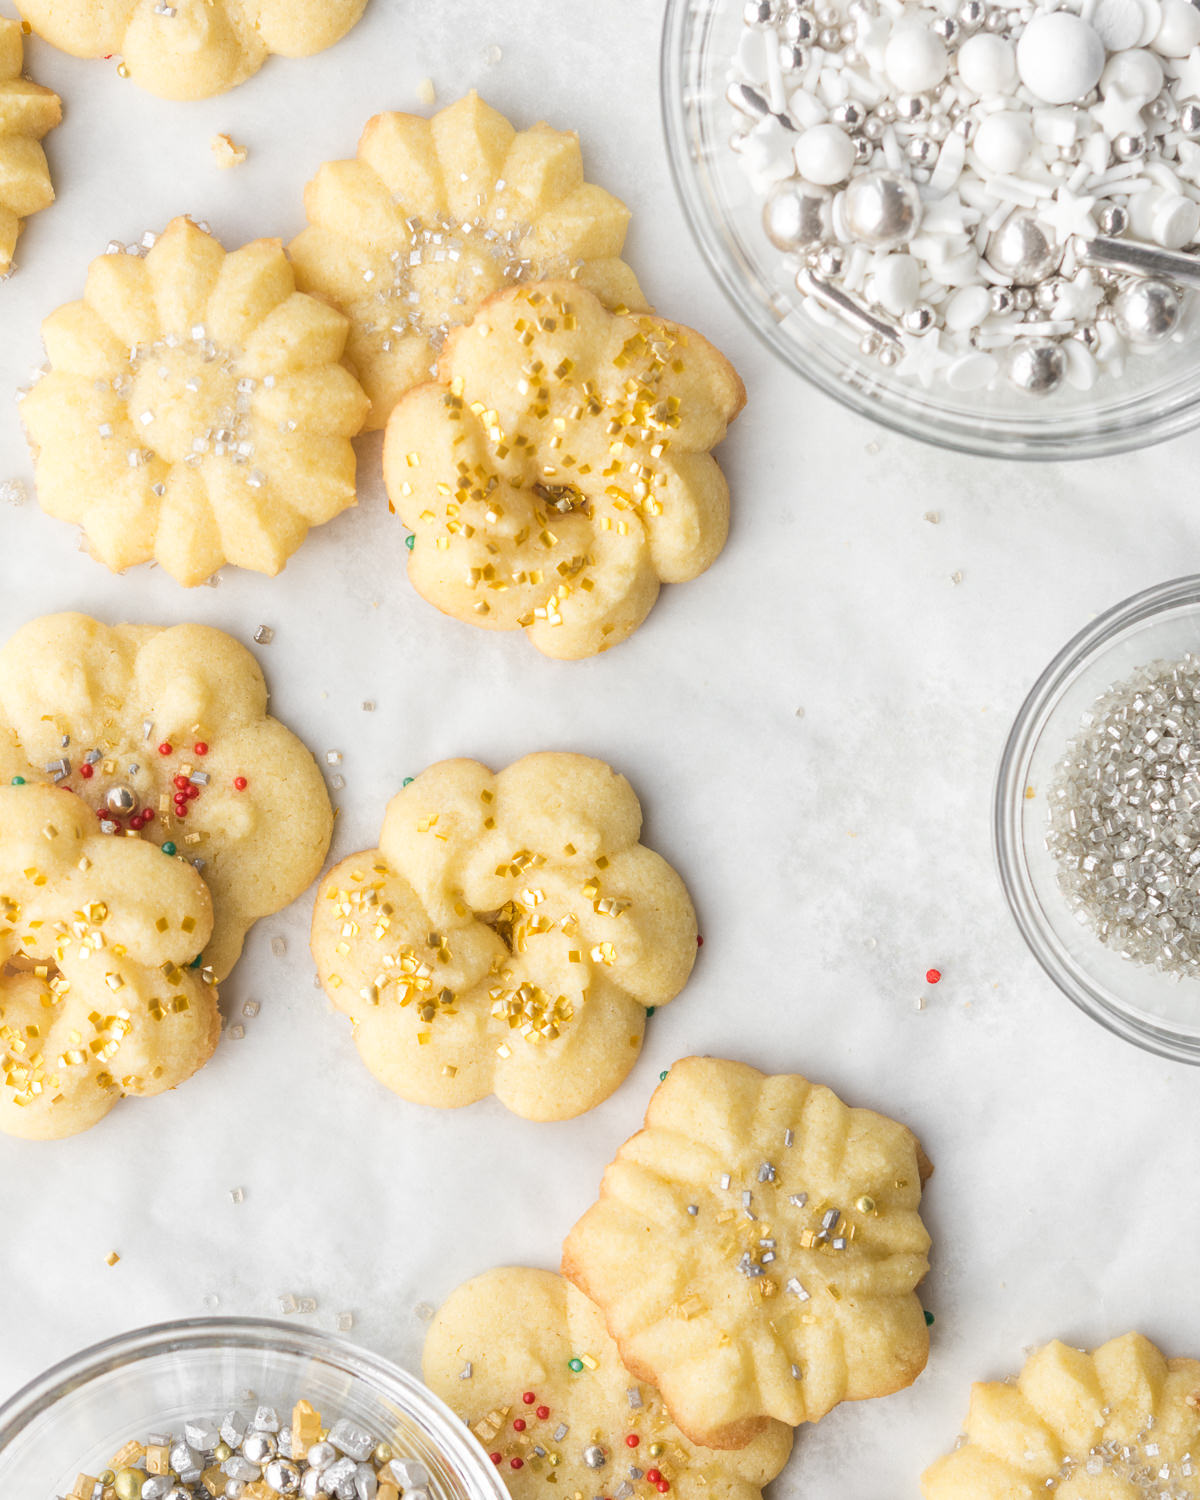 Sugar Cookie Recipe with my Oxo Cookie Press